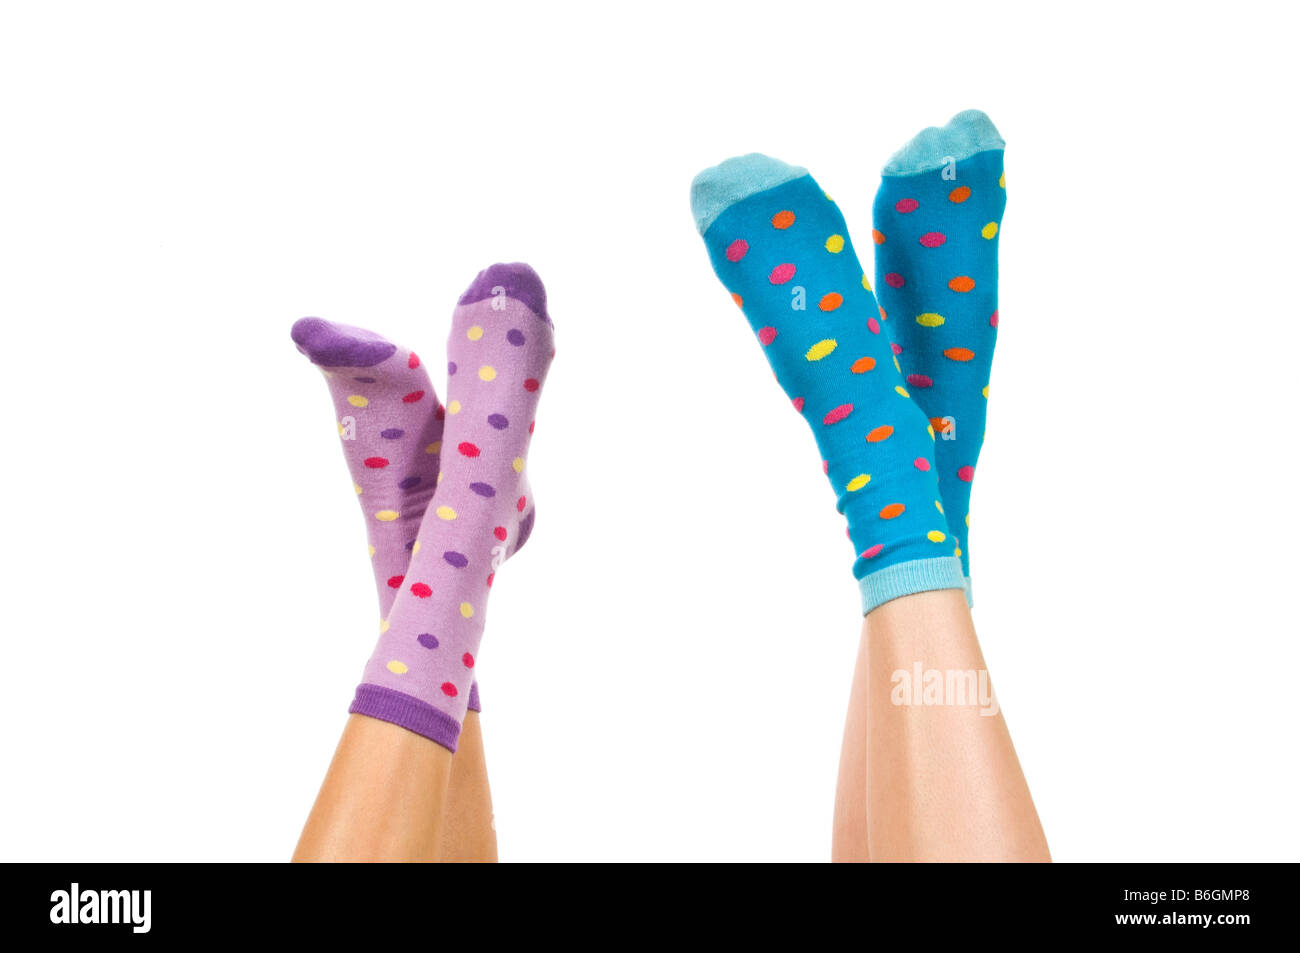 Horizontal close up portrait of two pairs of crossed feet wearing spotty socks in the air against a white background Stock Photo